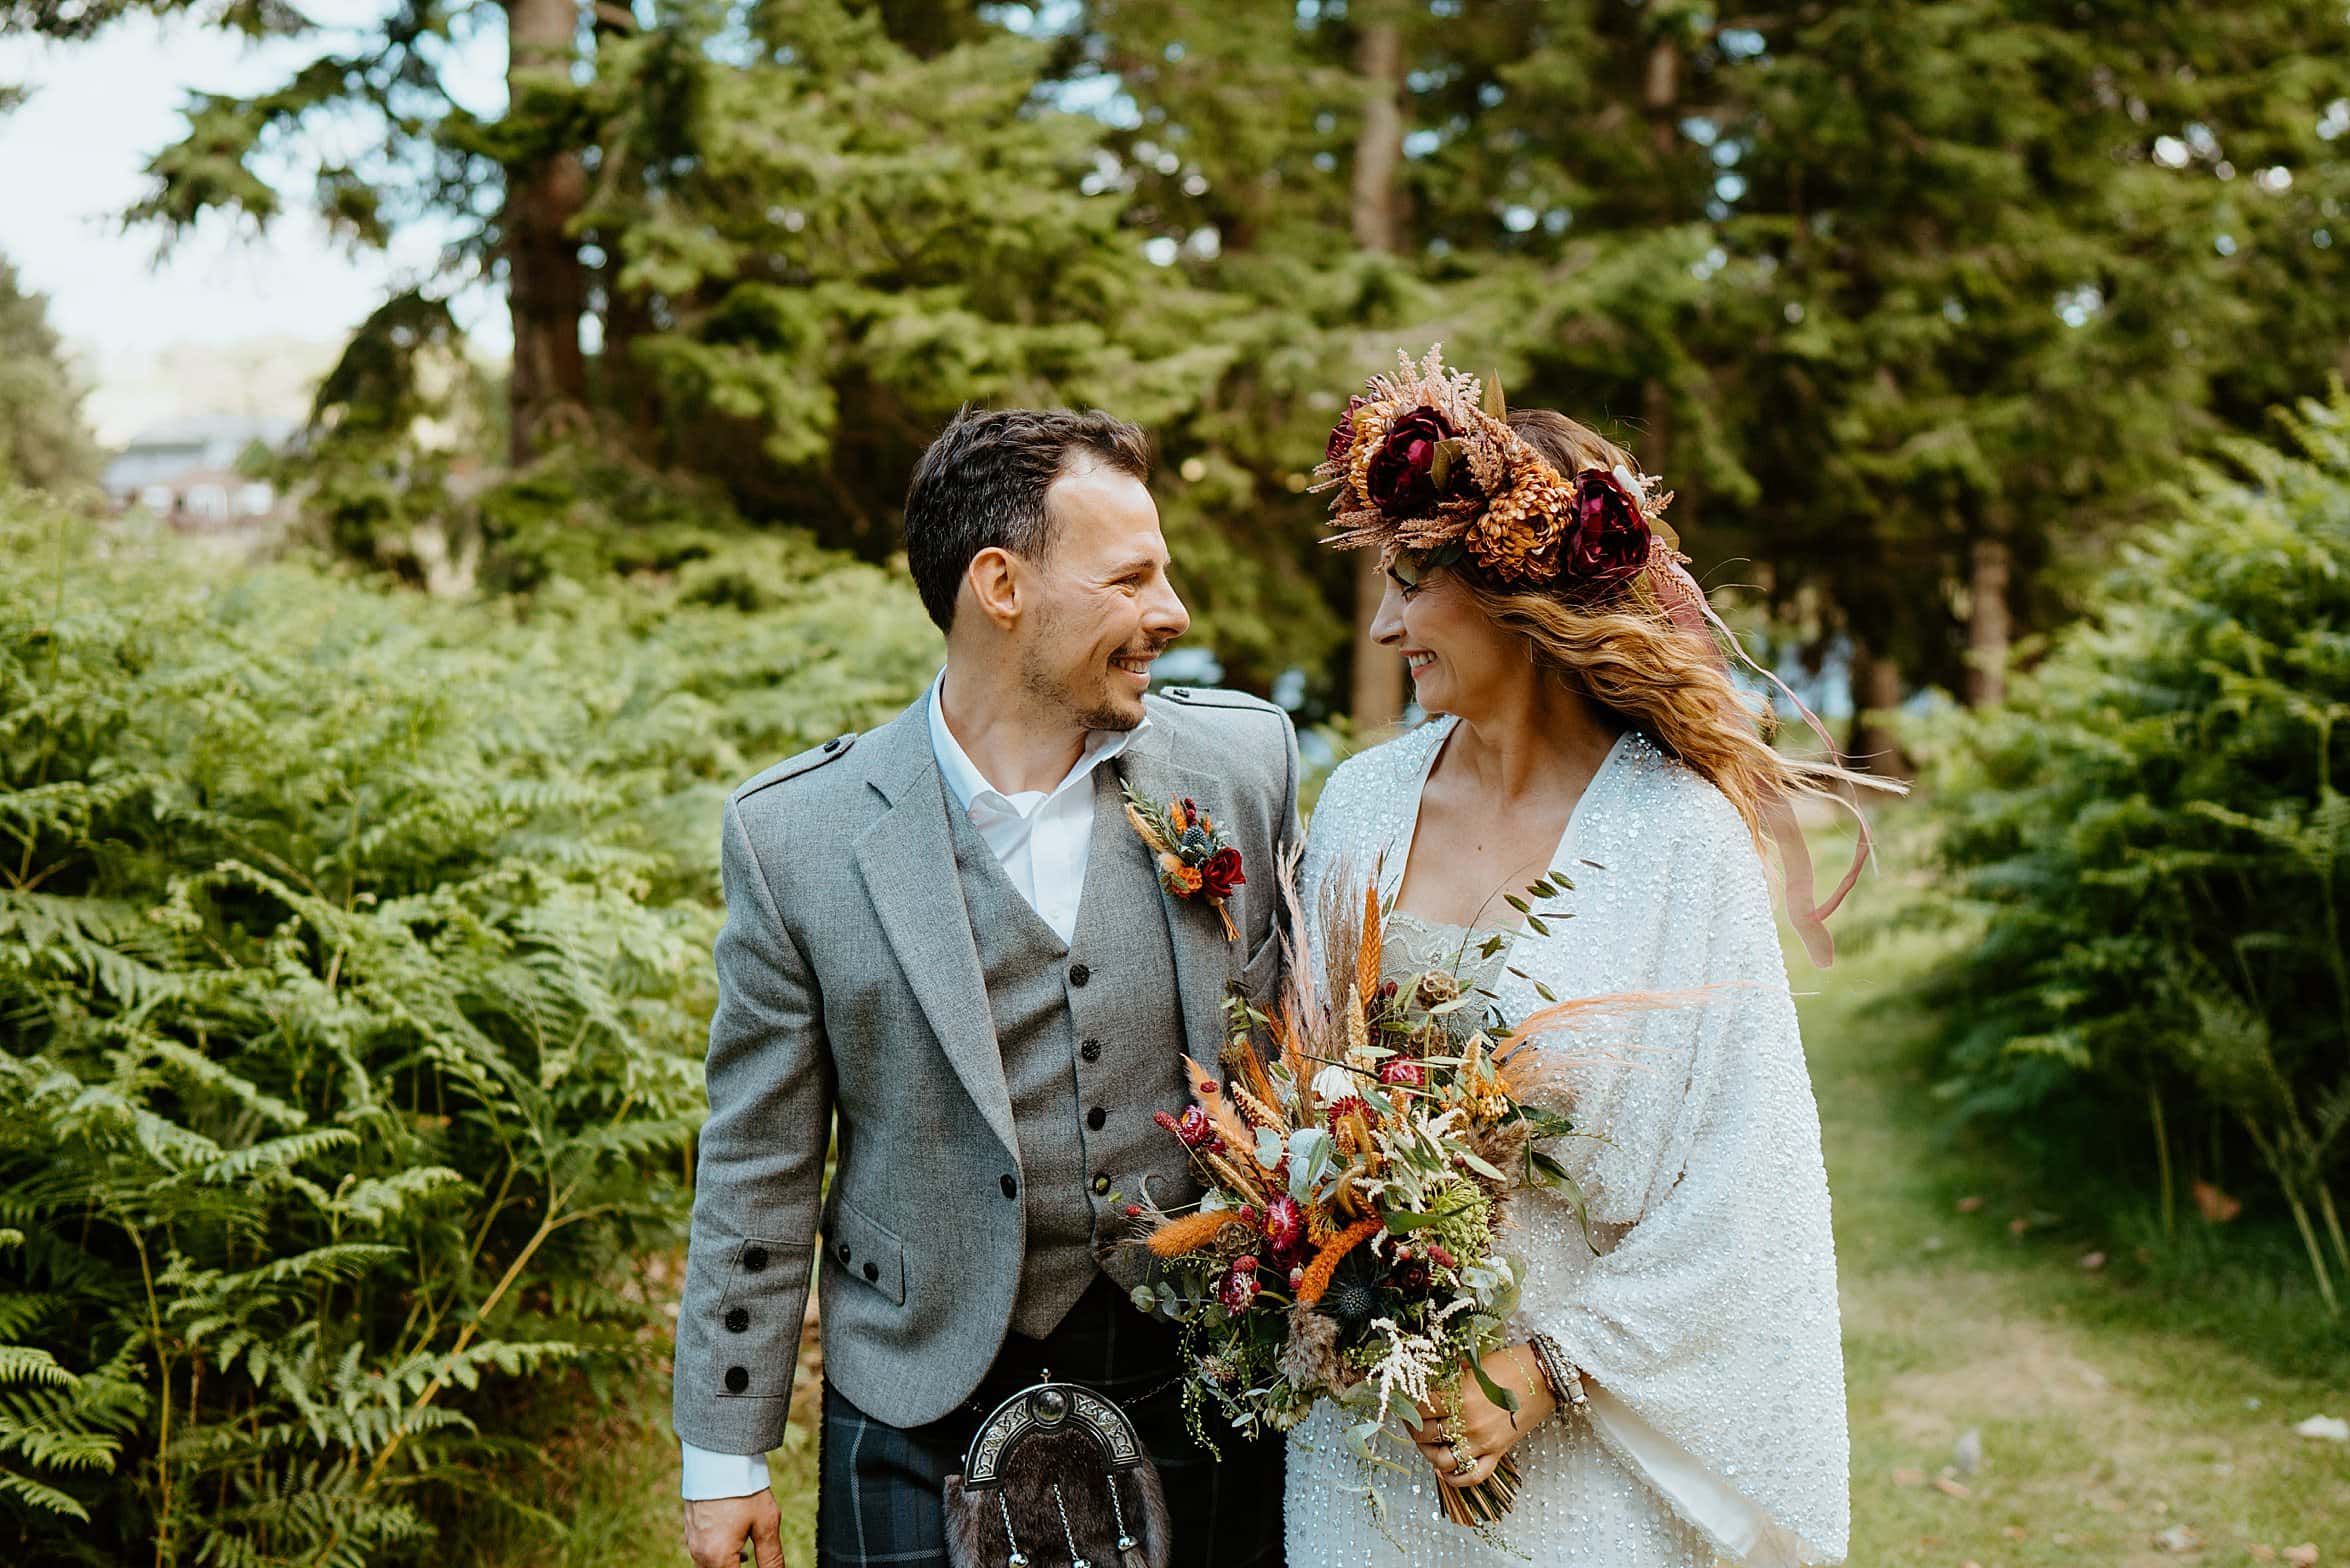 bride wearing white dress floral crown and holding bouquet groom wearing kilt outfit smiling at each other as they walk through woodland cardney steading wedding venue